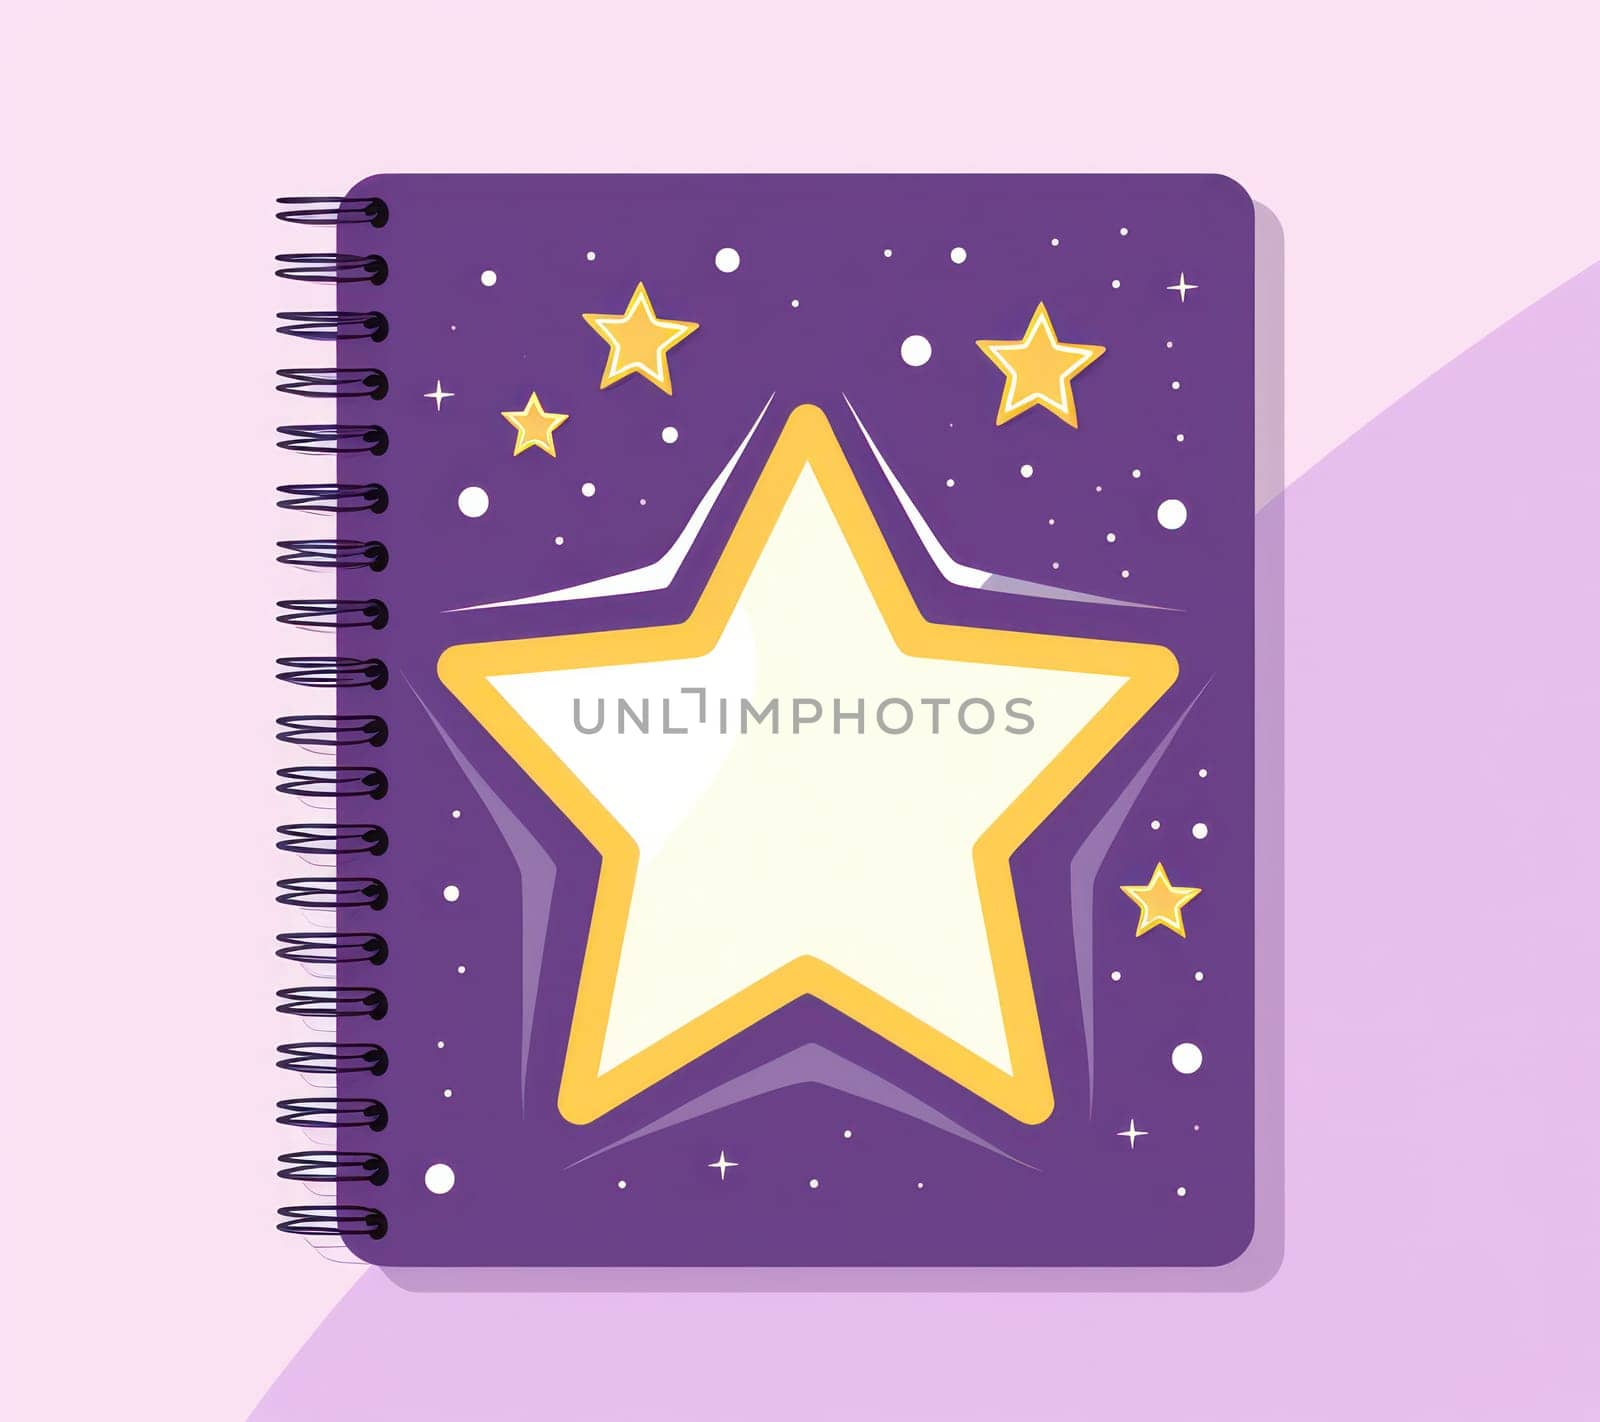 Blank Notebook with Paper and Pencil Icon on Glowing Pink Background: A Dreamy Open Diary for Learning and Creativity by Vichizh